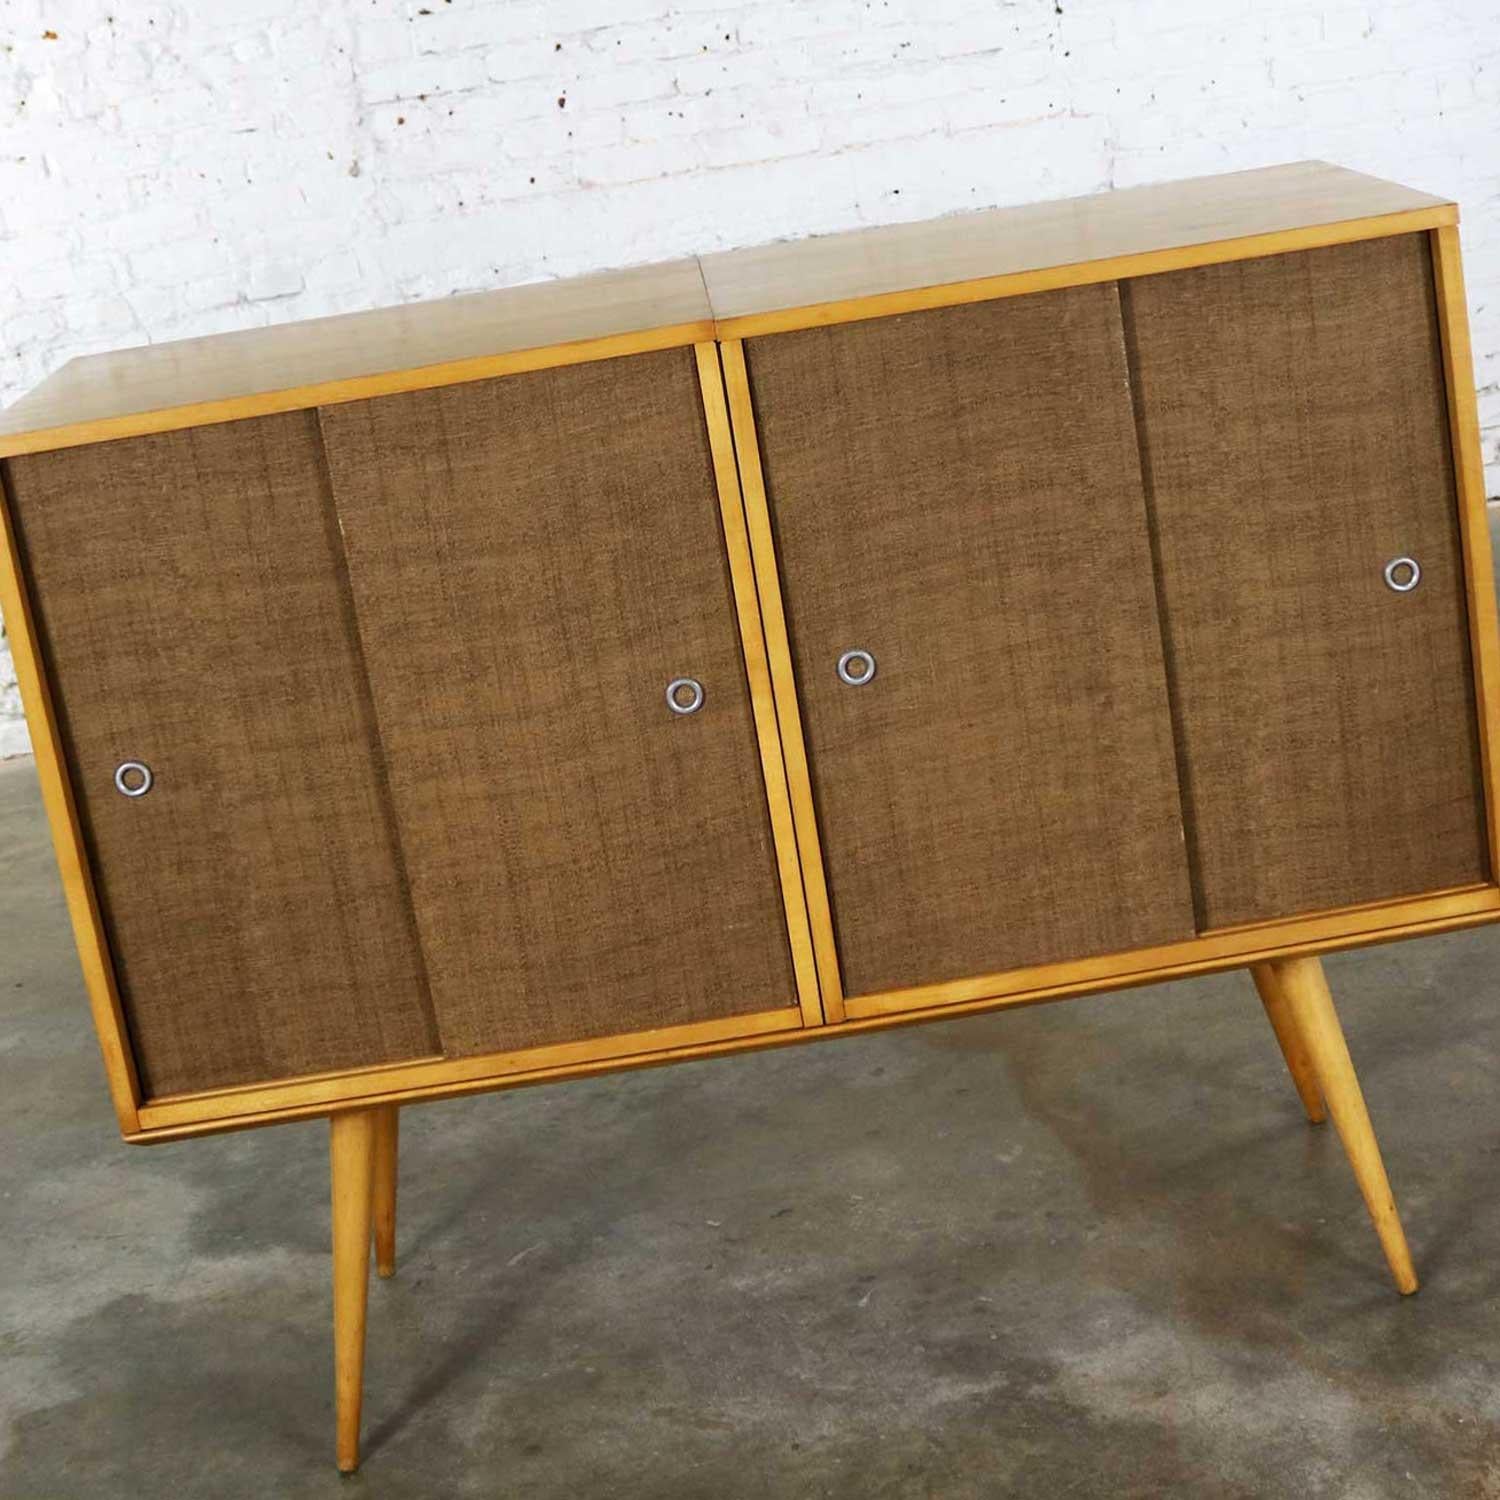 Iconic pair of Mid-Century Modern vintage sliding door cabinets with grasscloth covering on the solid natural maple bench platform base from the Planner Group designed by Paul McCobb for Winchendon makes up this three-piece set. All three pieces are